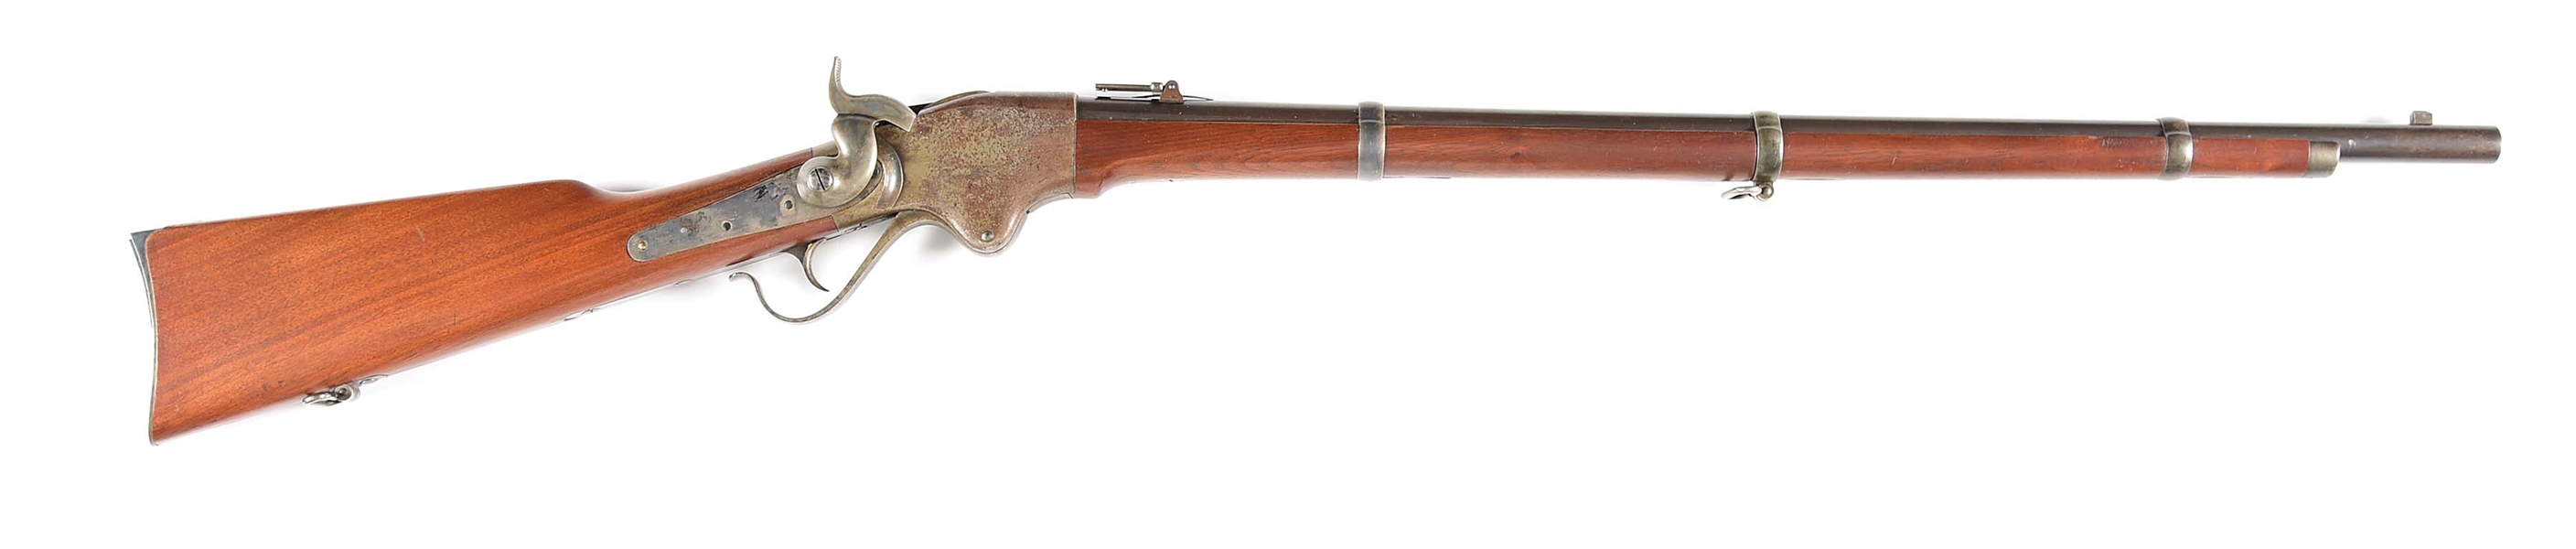 (A) SPENCER MODEL 1860.56-50 REPEATING RIFLE